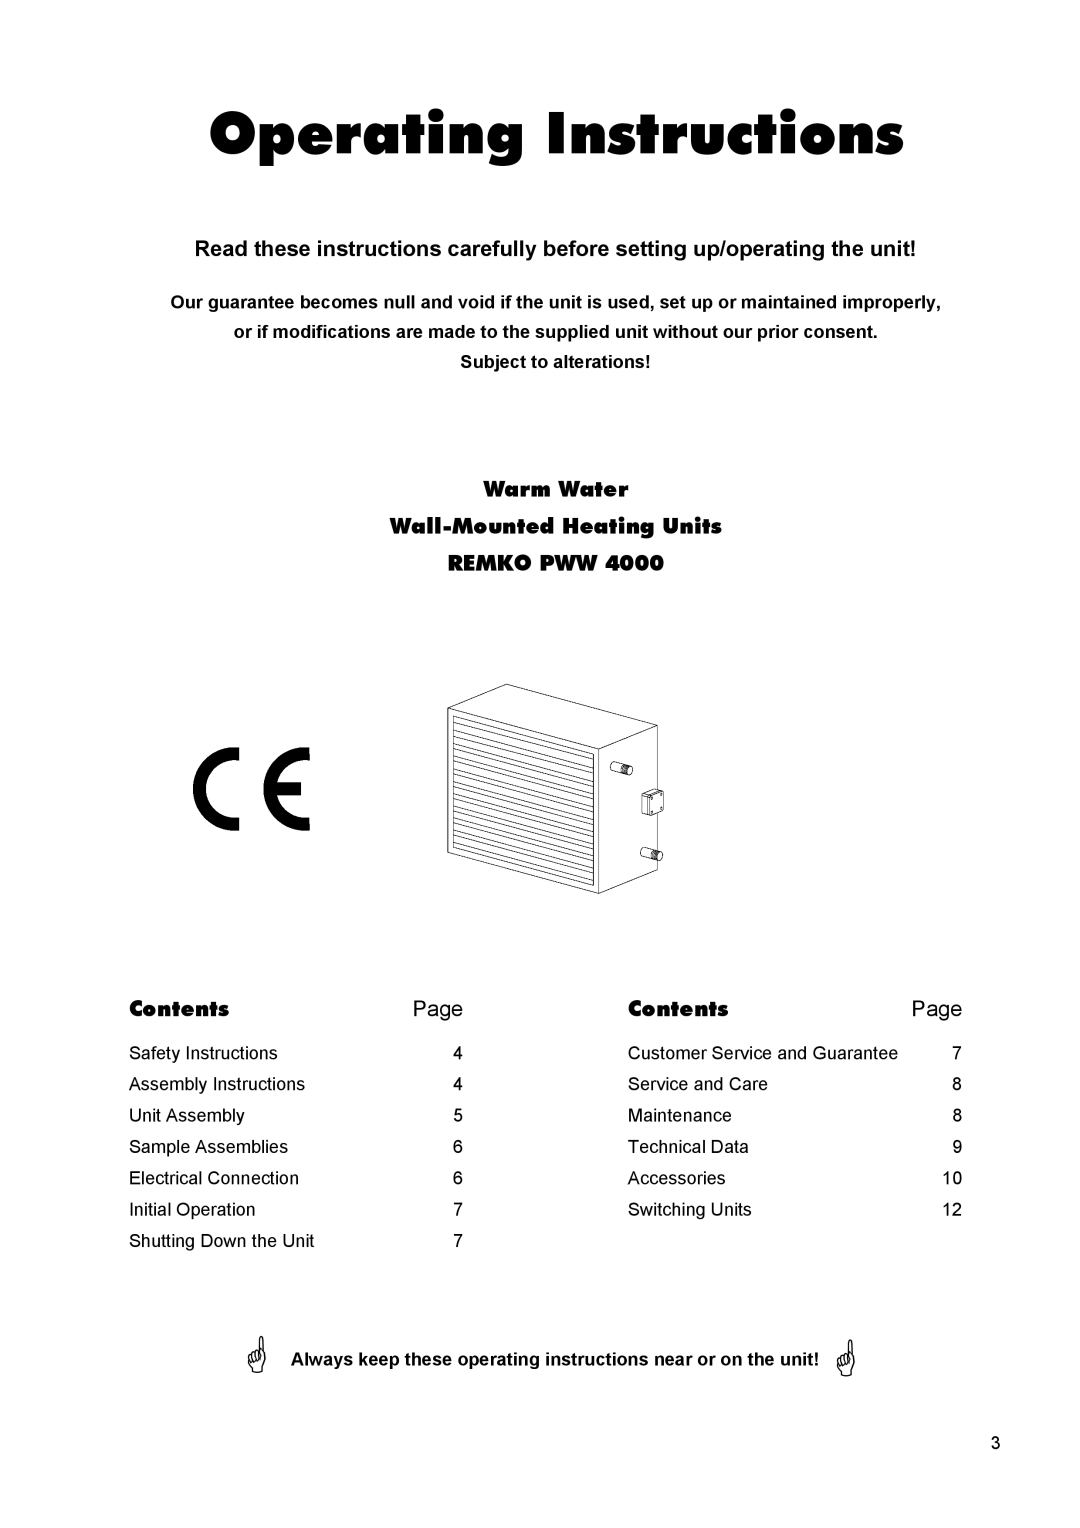 Panasonic PWW 4000 manual Warm Water Wall-MountedHeating Units REMKO PWW, Contents, Page, Subject to alterations 